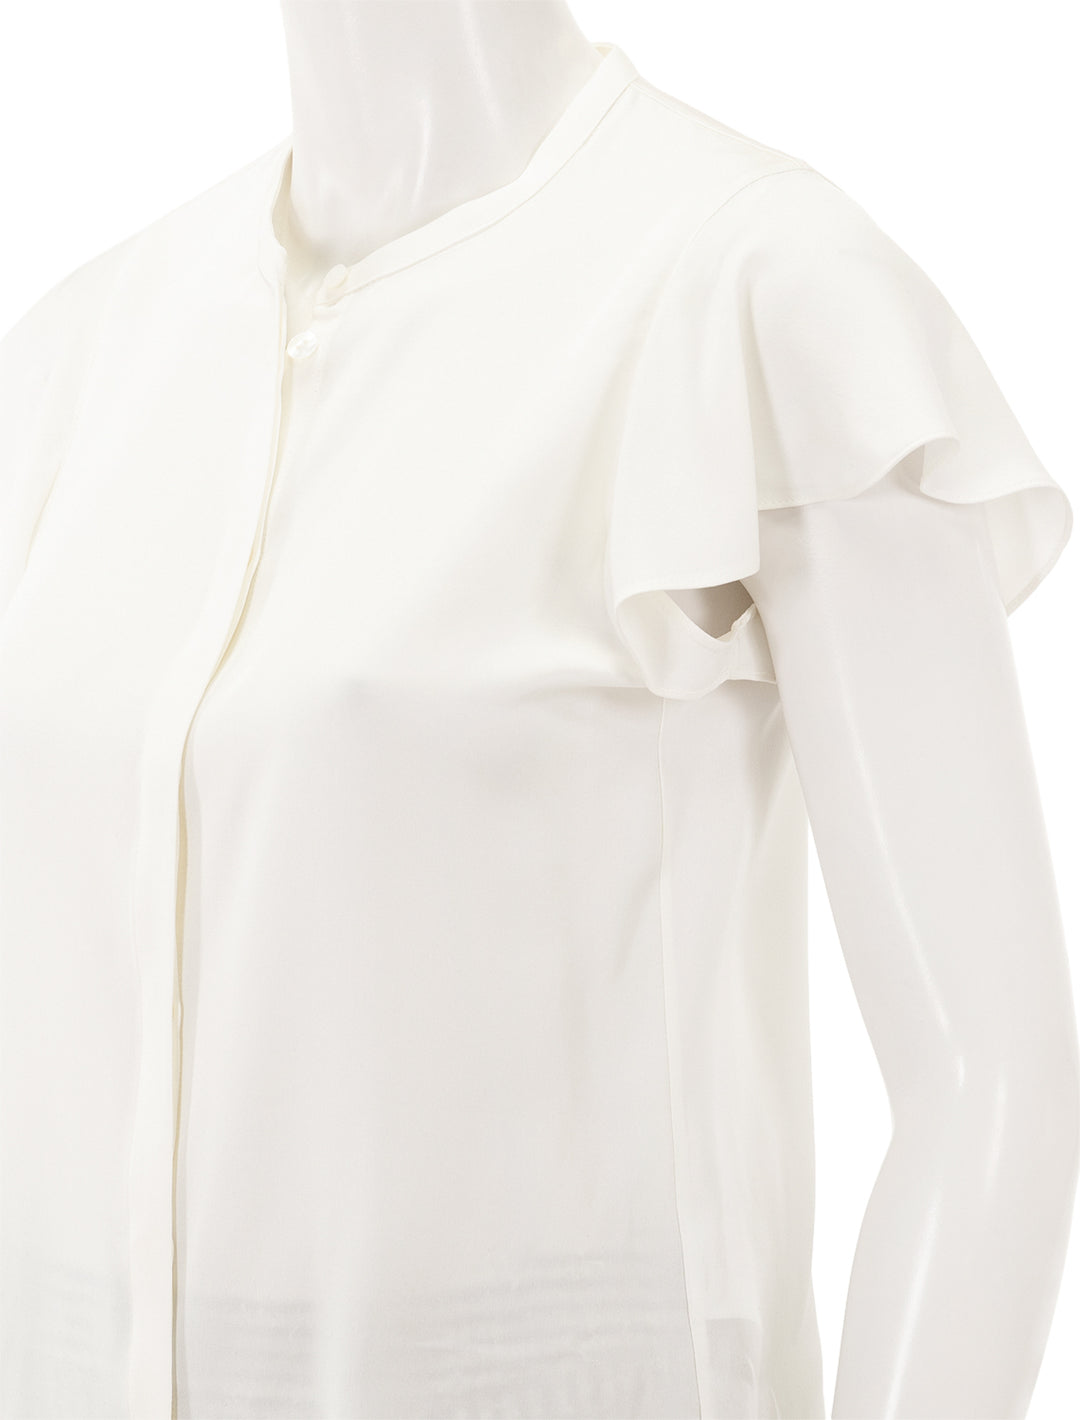 Close-up view of Theory's ruffle sleeve top in ivory.